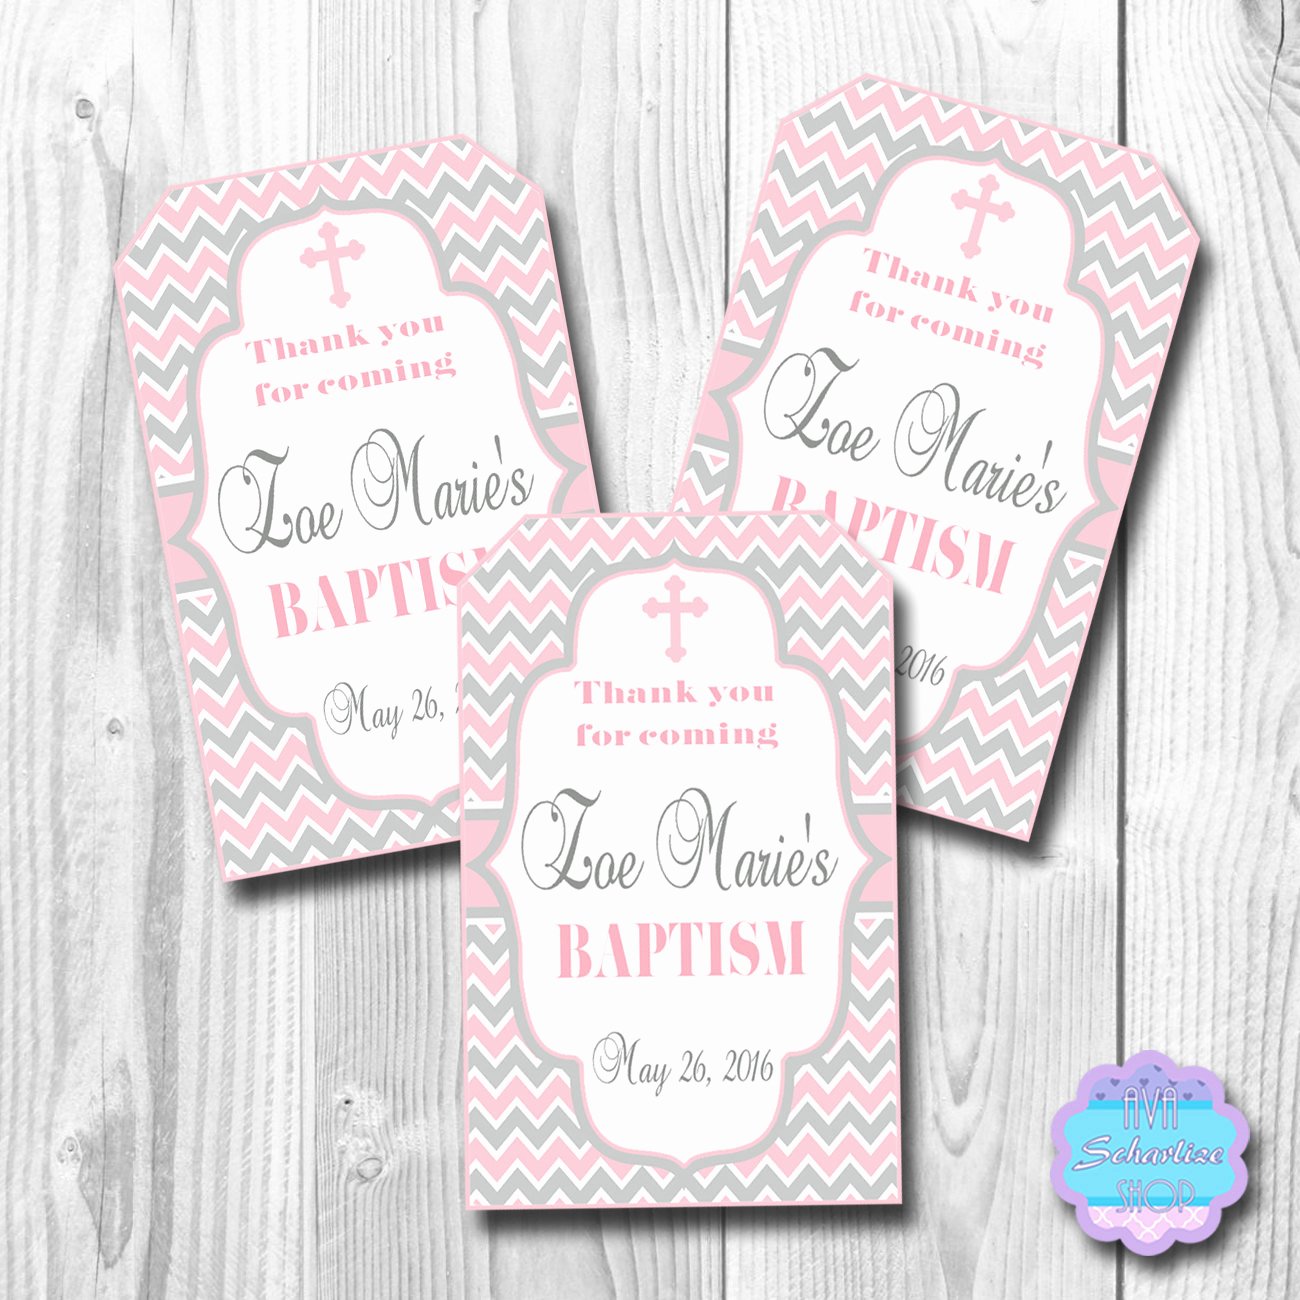 Baptism Thank You Tags New Christening Favor Tags Baptism Baptismal Thank You Tags